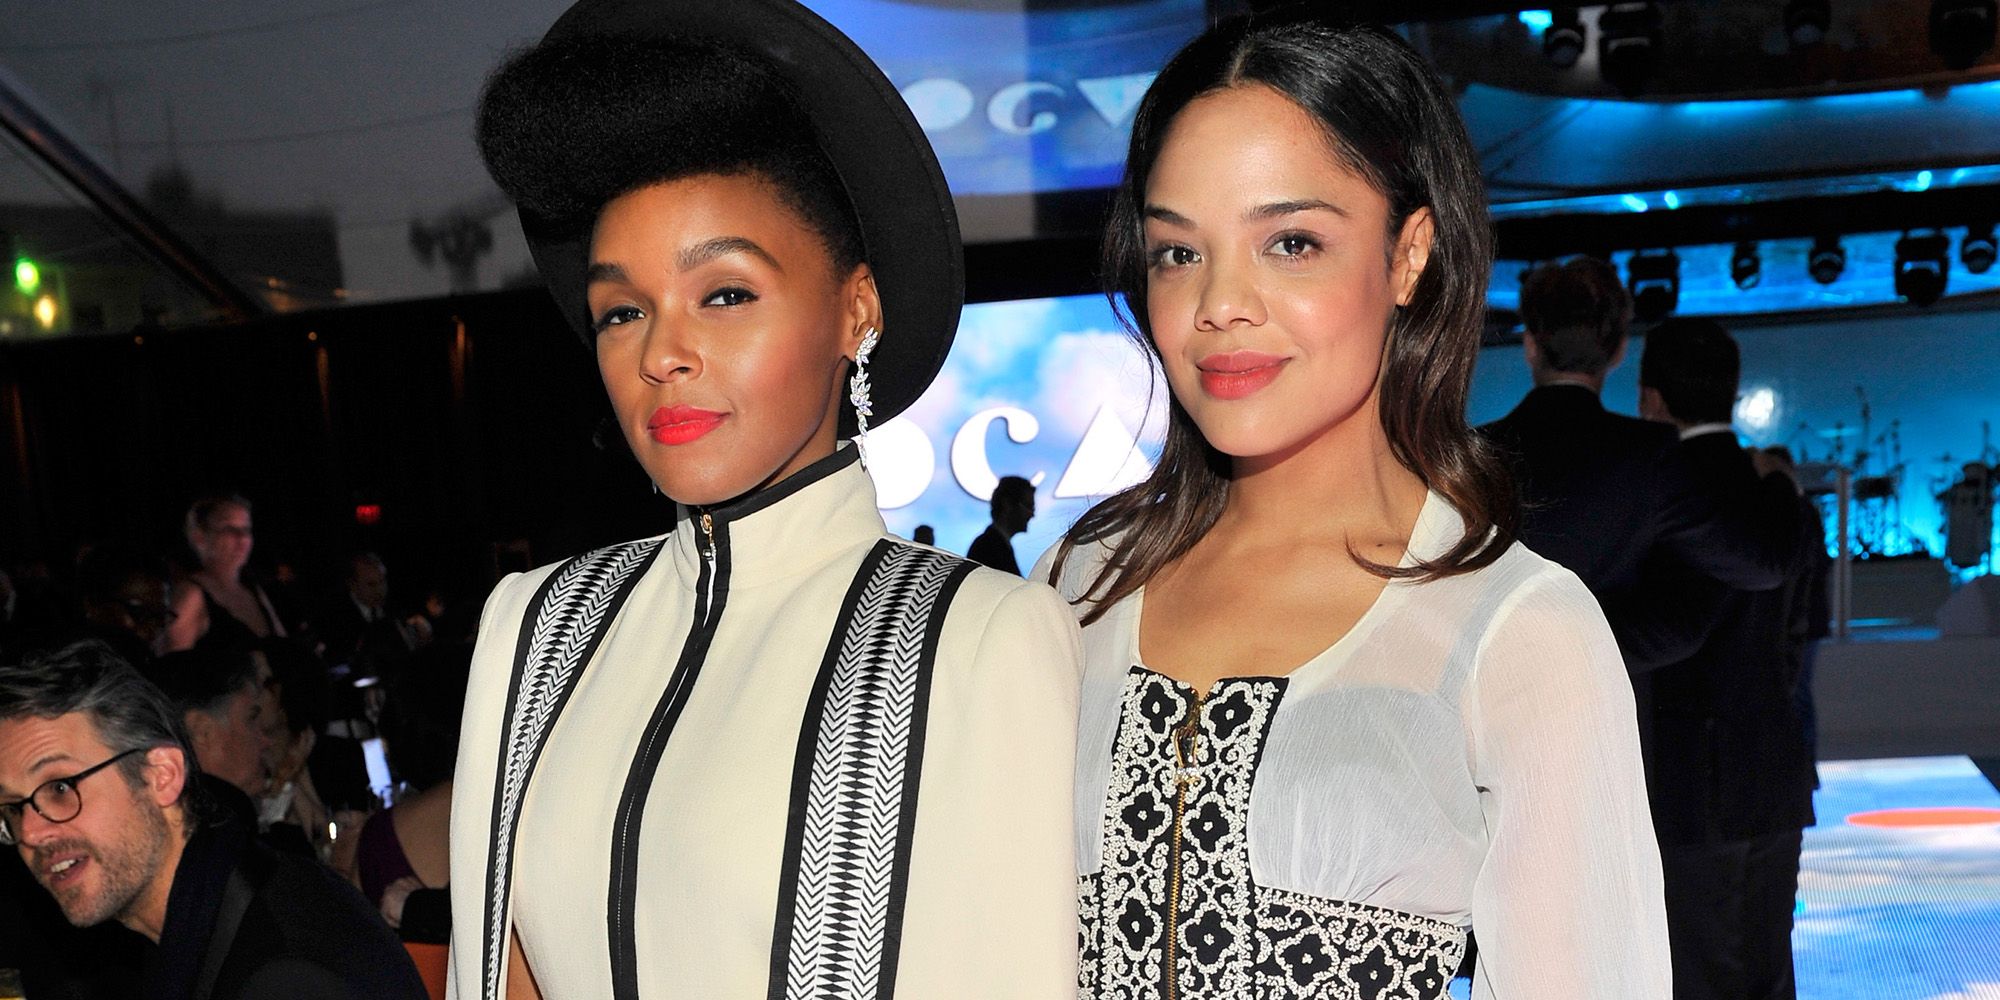 Tessa Thompson Comes Out as Bisexual and Says She and Janelle Monáe